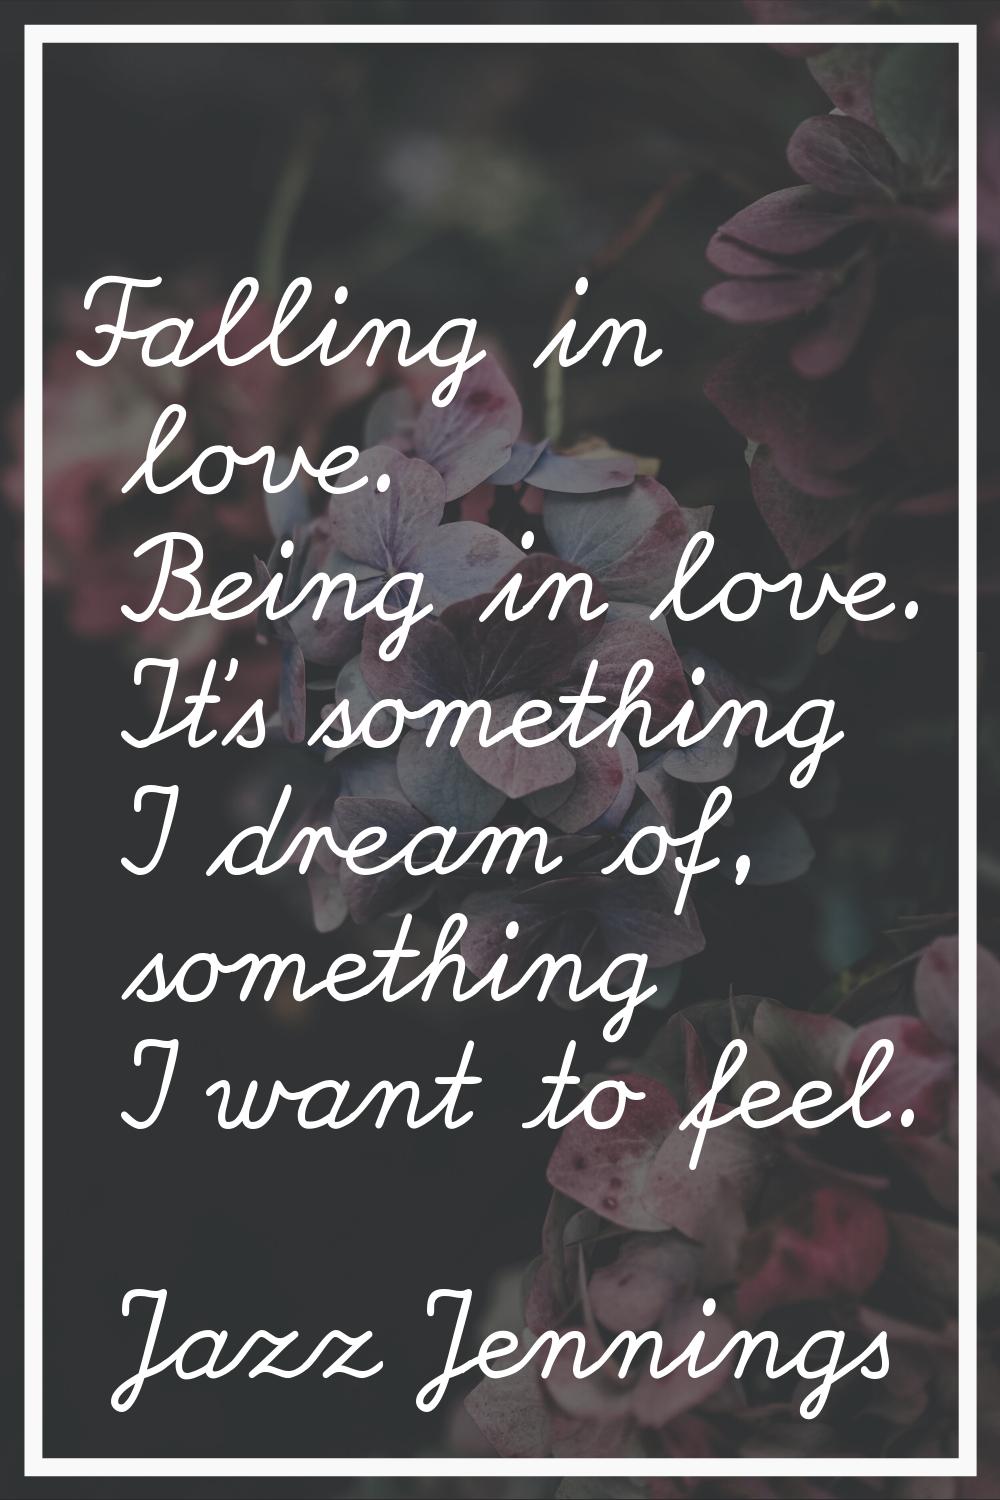 Falling in love. Being in love. It's something I dream of, something I want to feel.